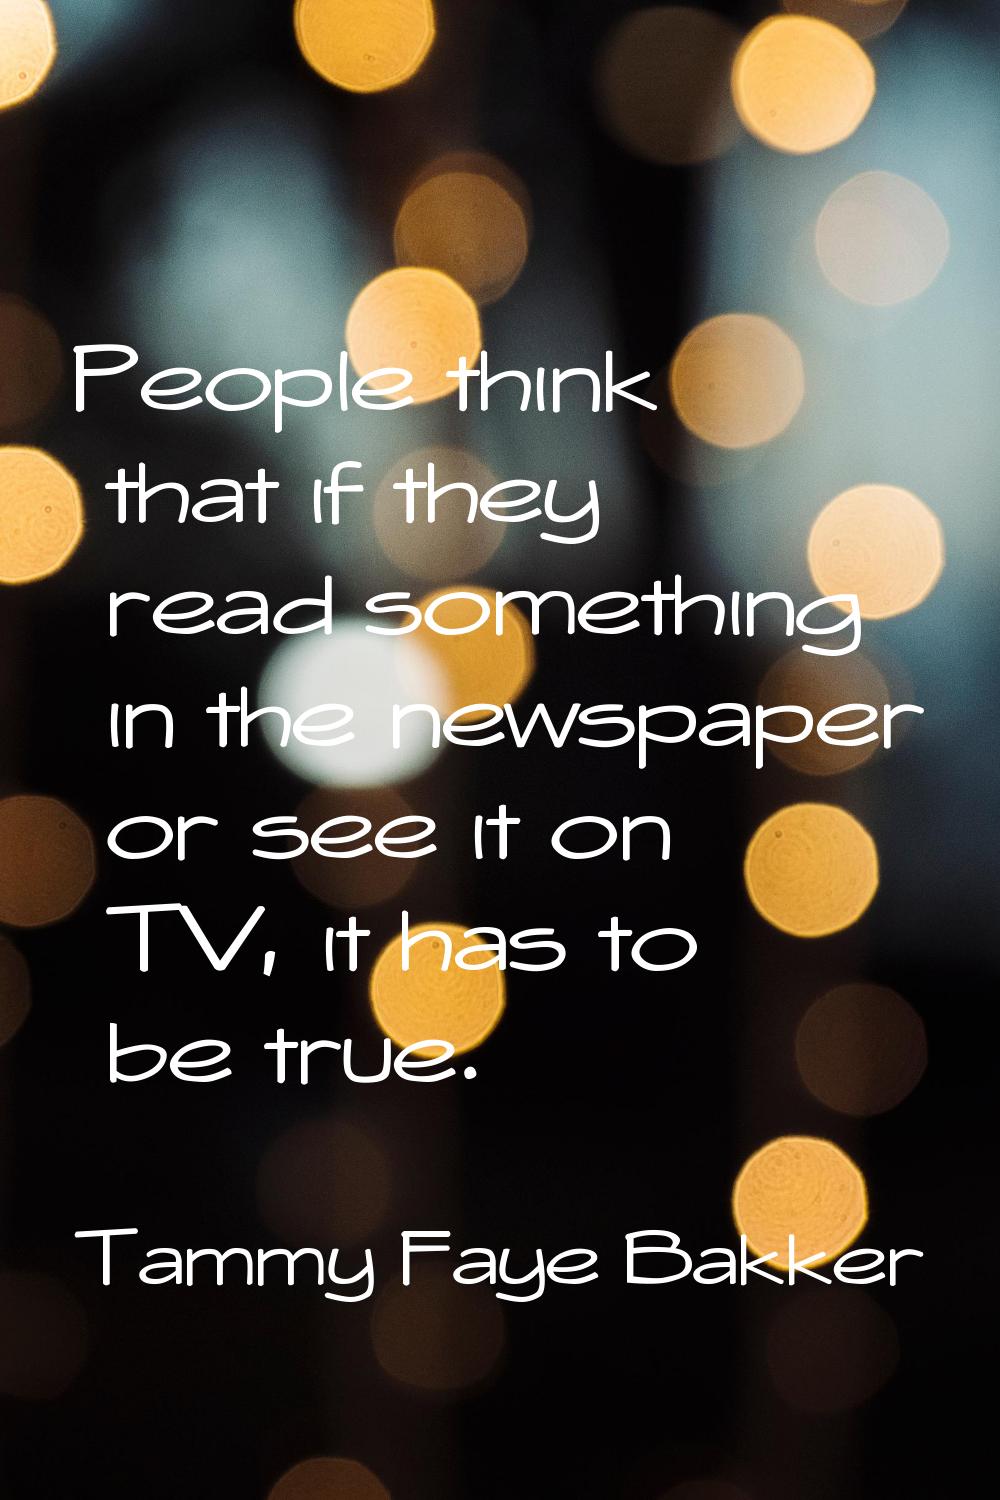 People think that if they read something in the newspaper or see it on TV, it has to be true.